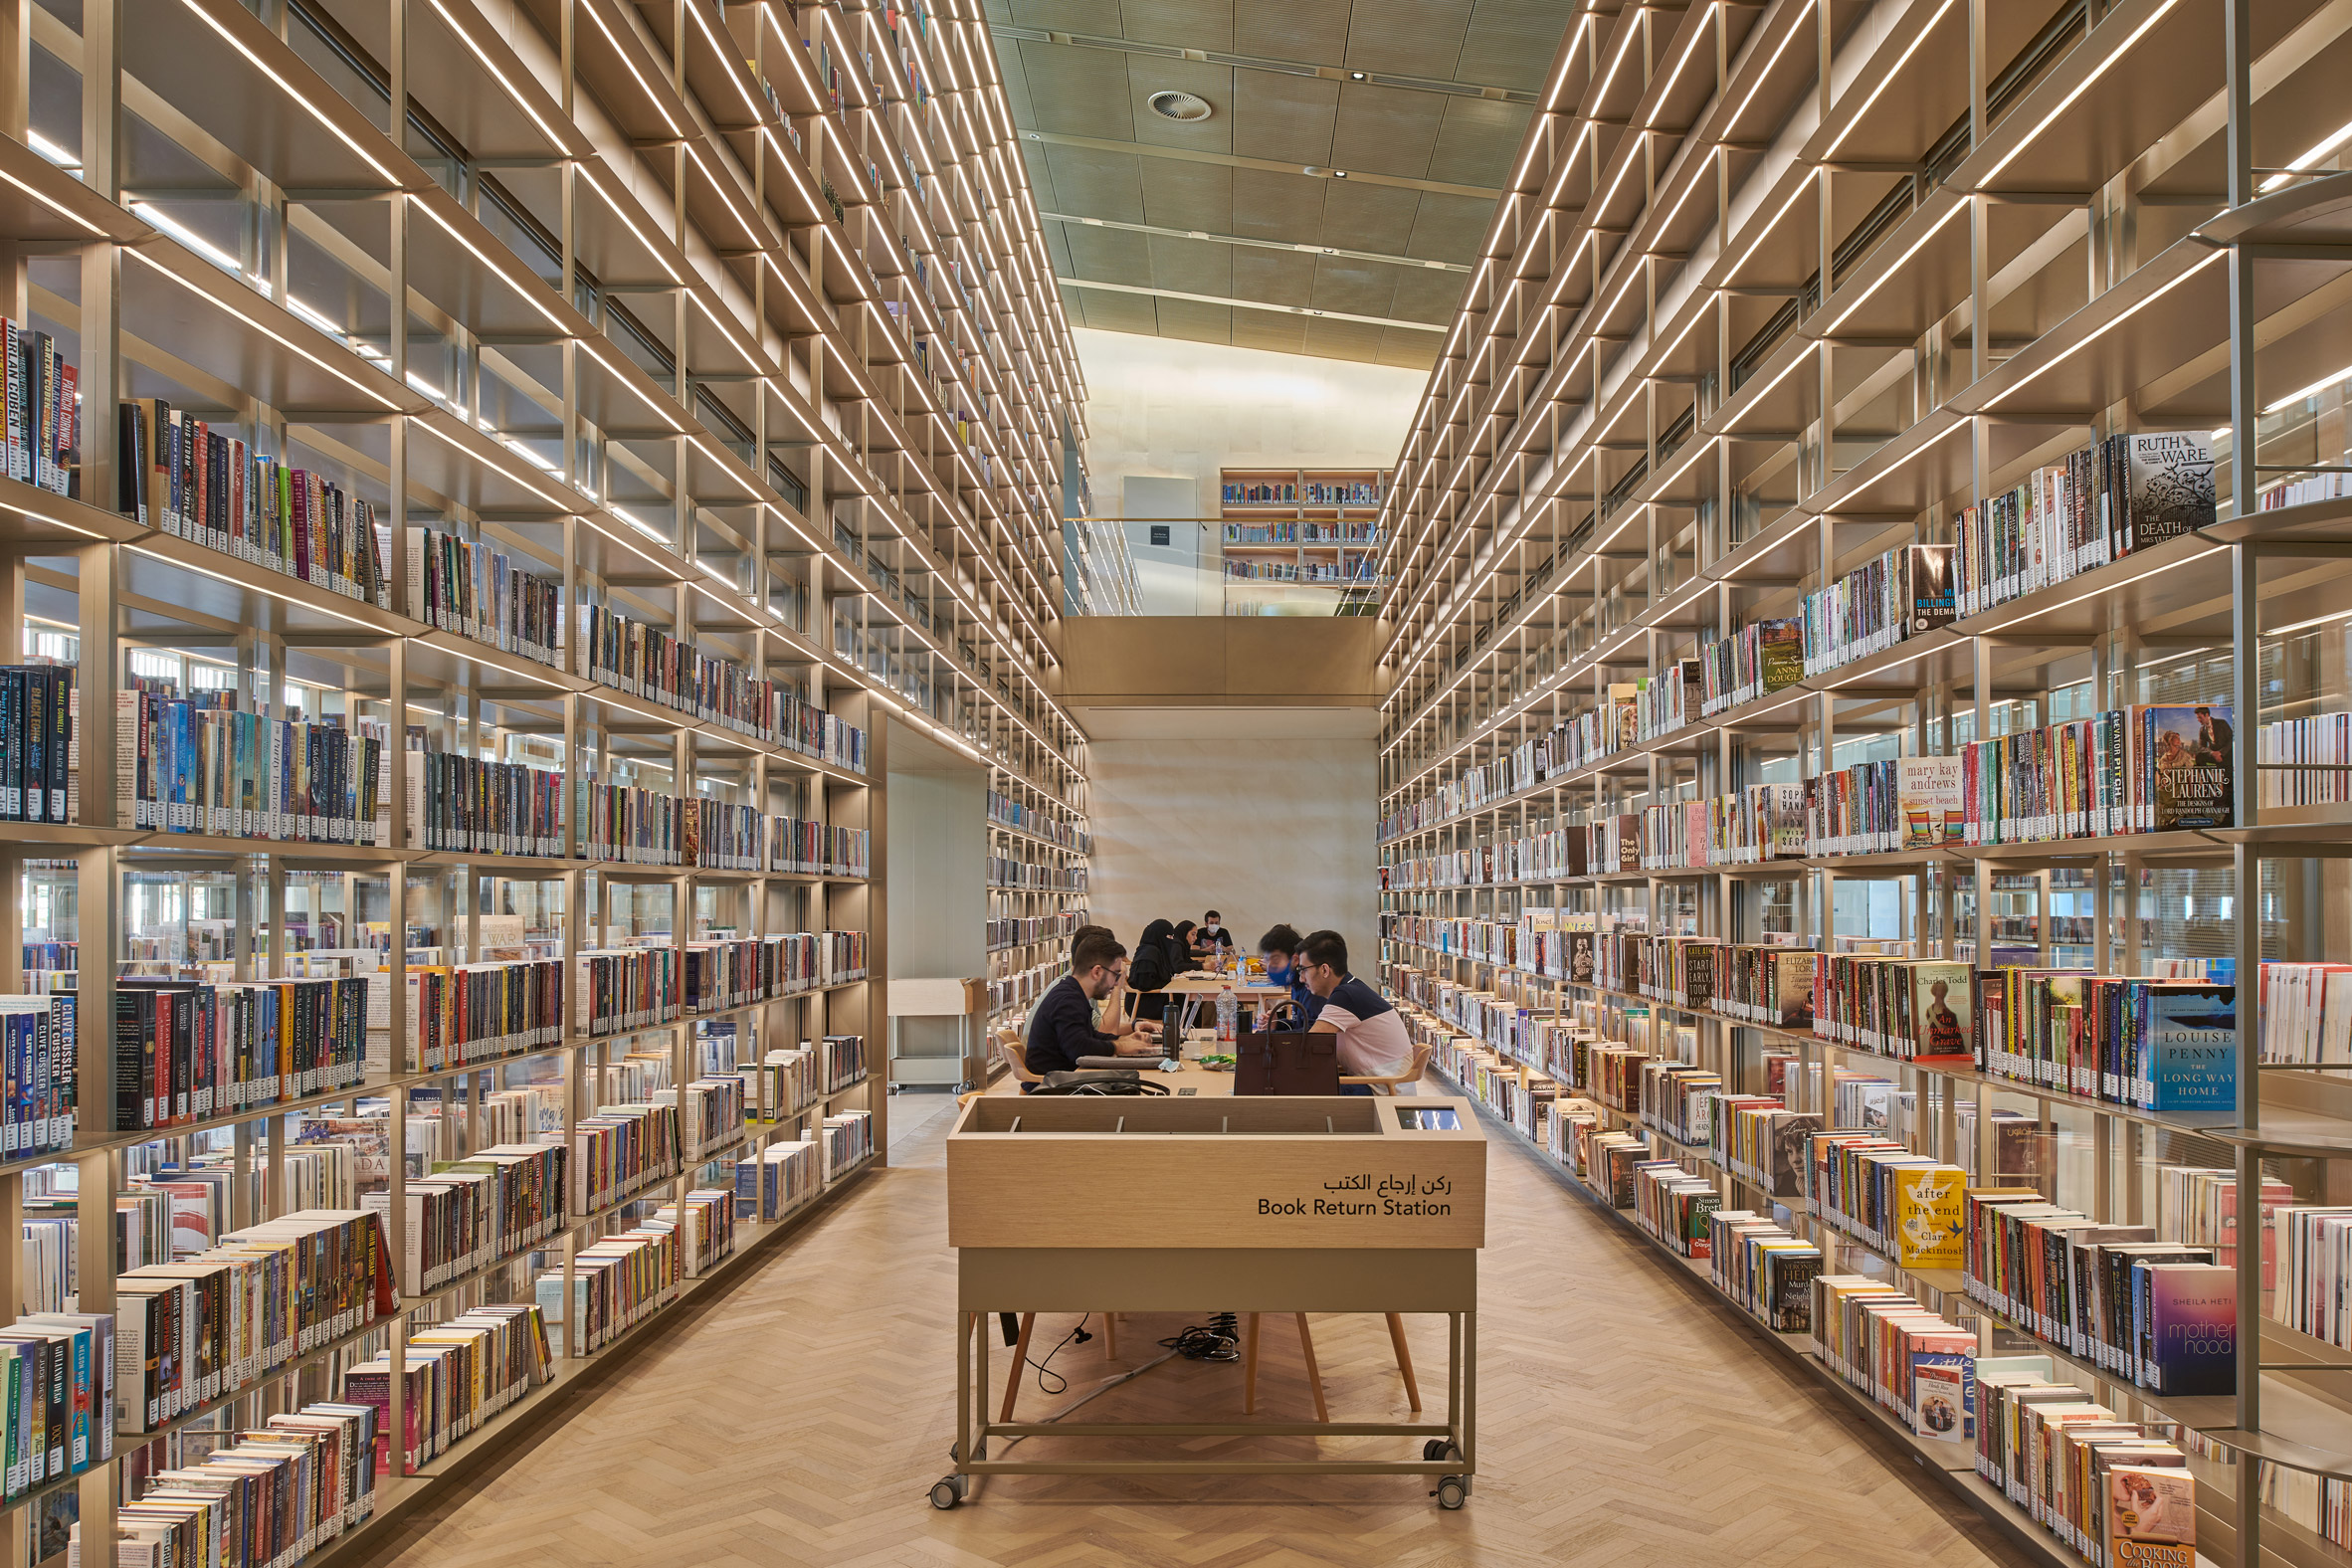 A book-filled reading space in a library by Foster + Partners